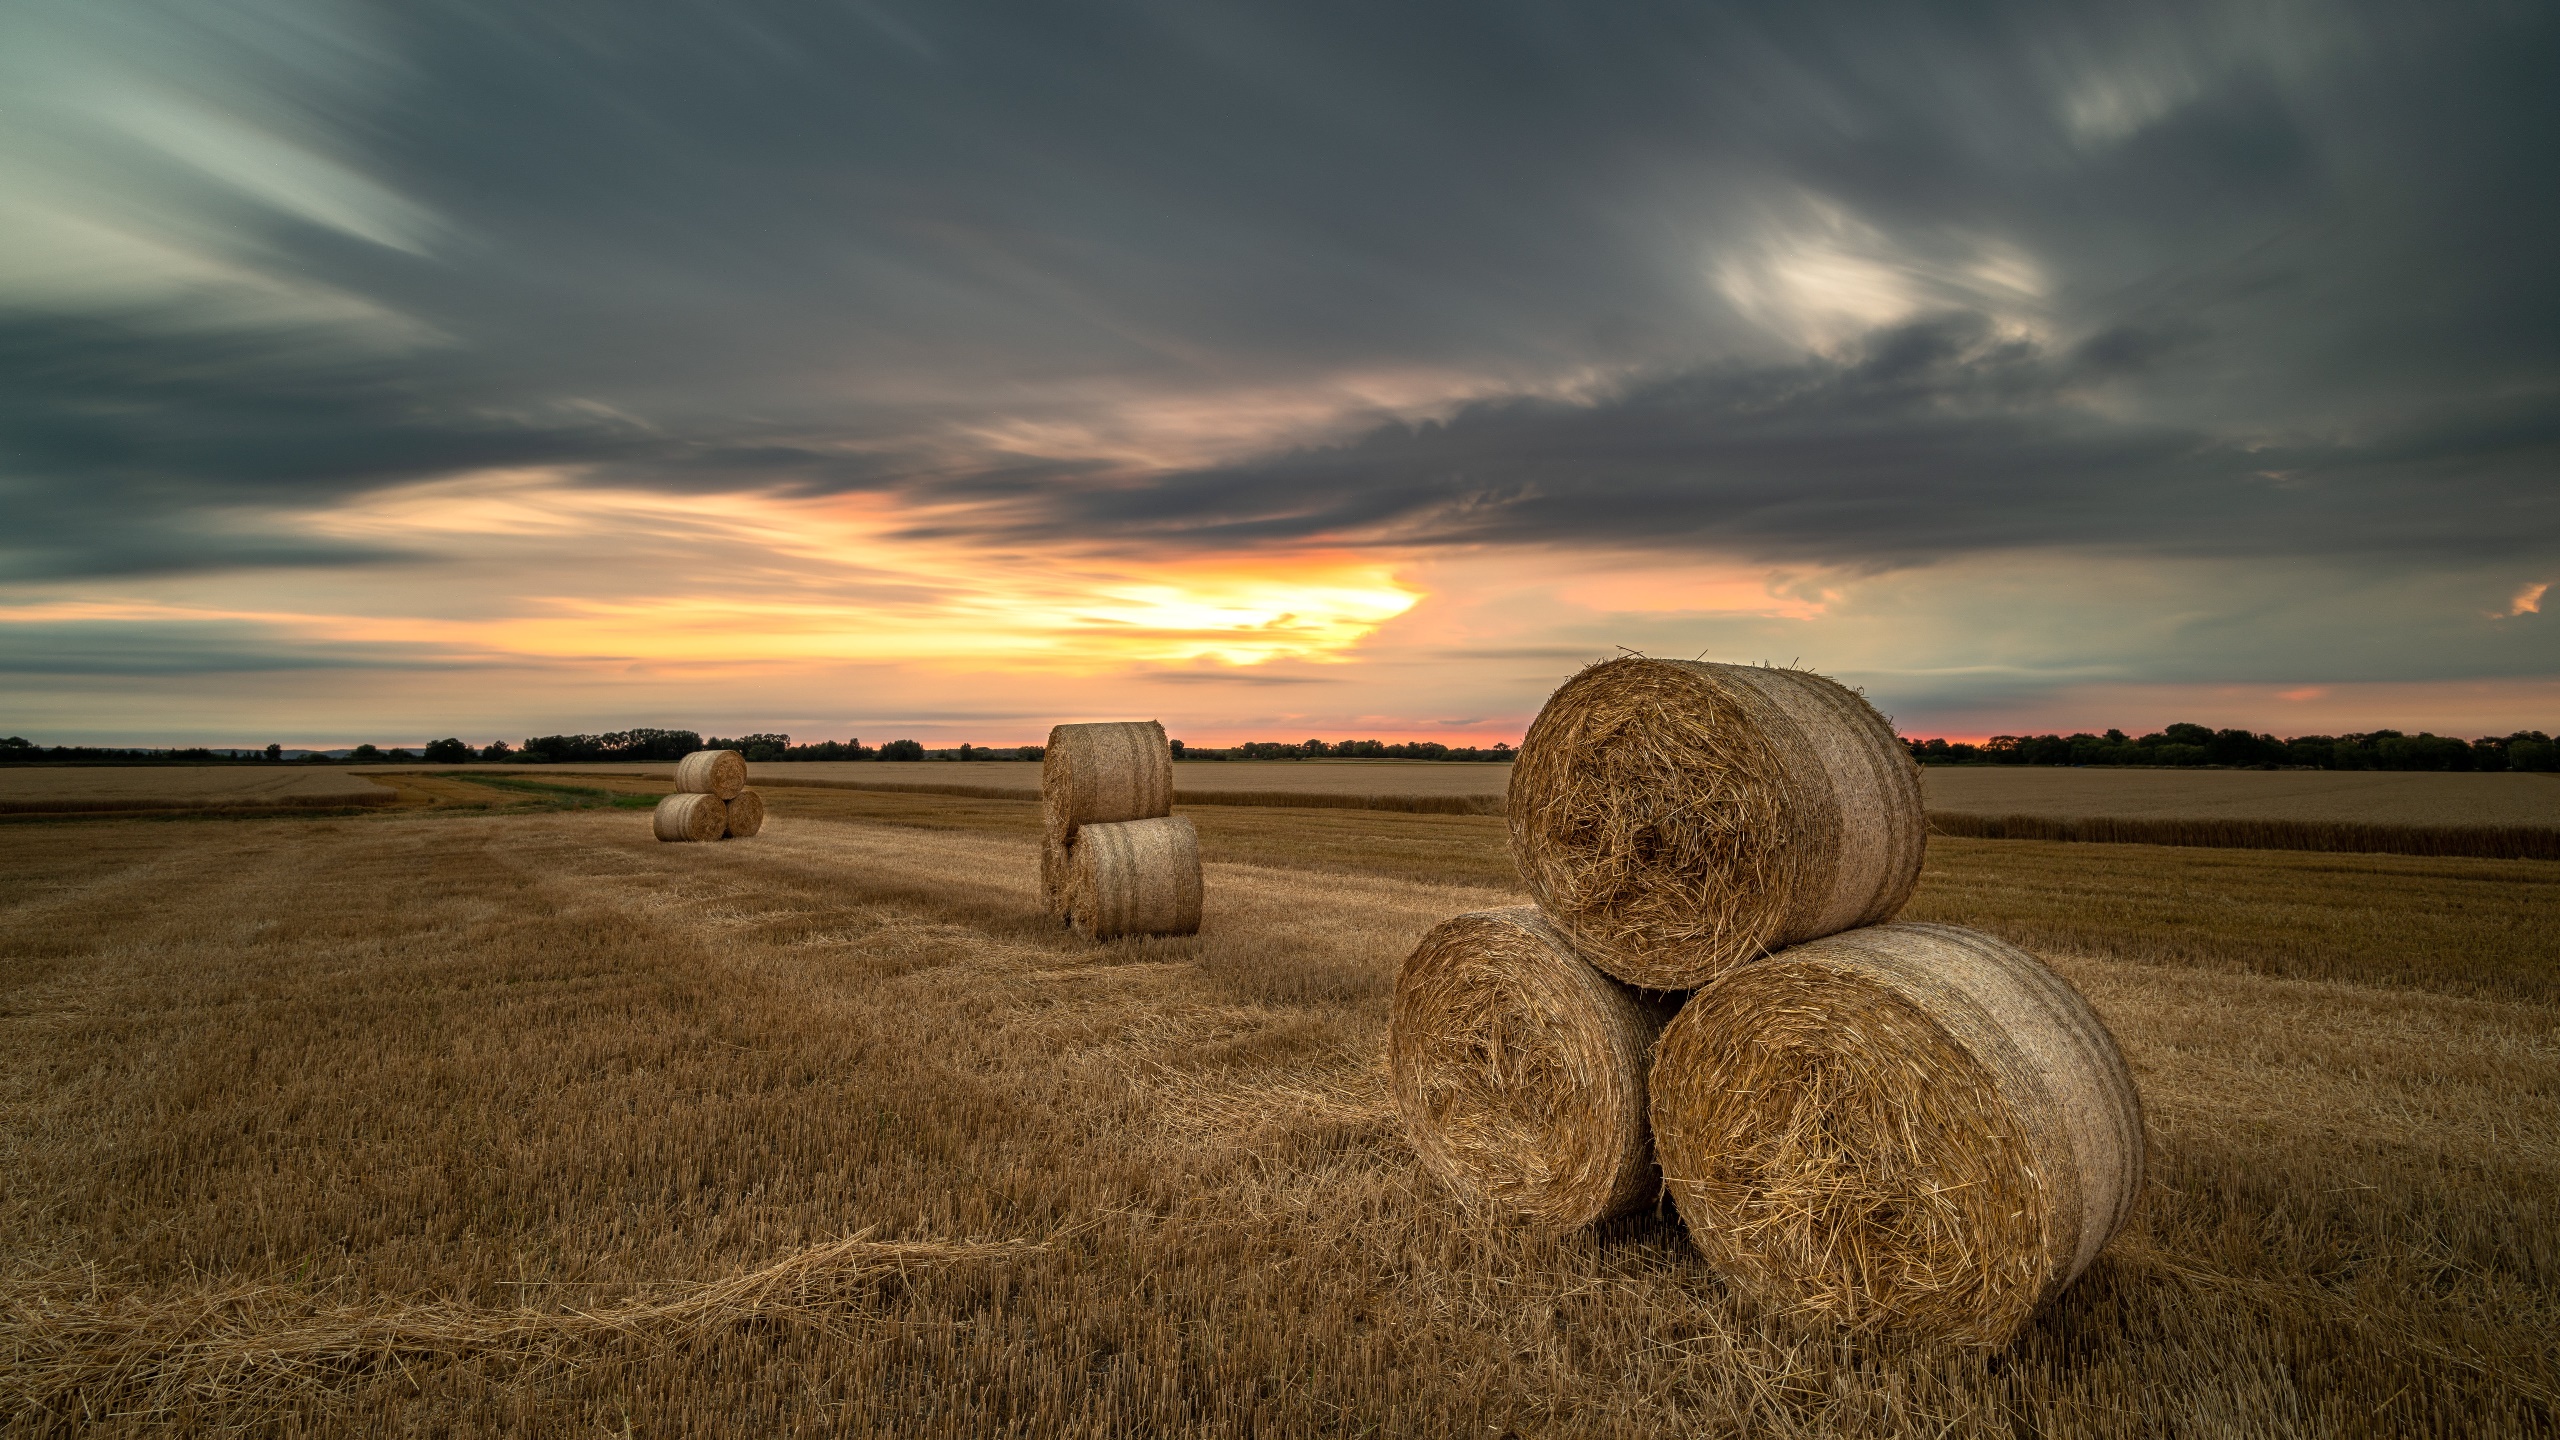 General 2560x1440 field outdoors straw sky nature hay bales stubble field evening